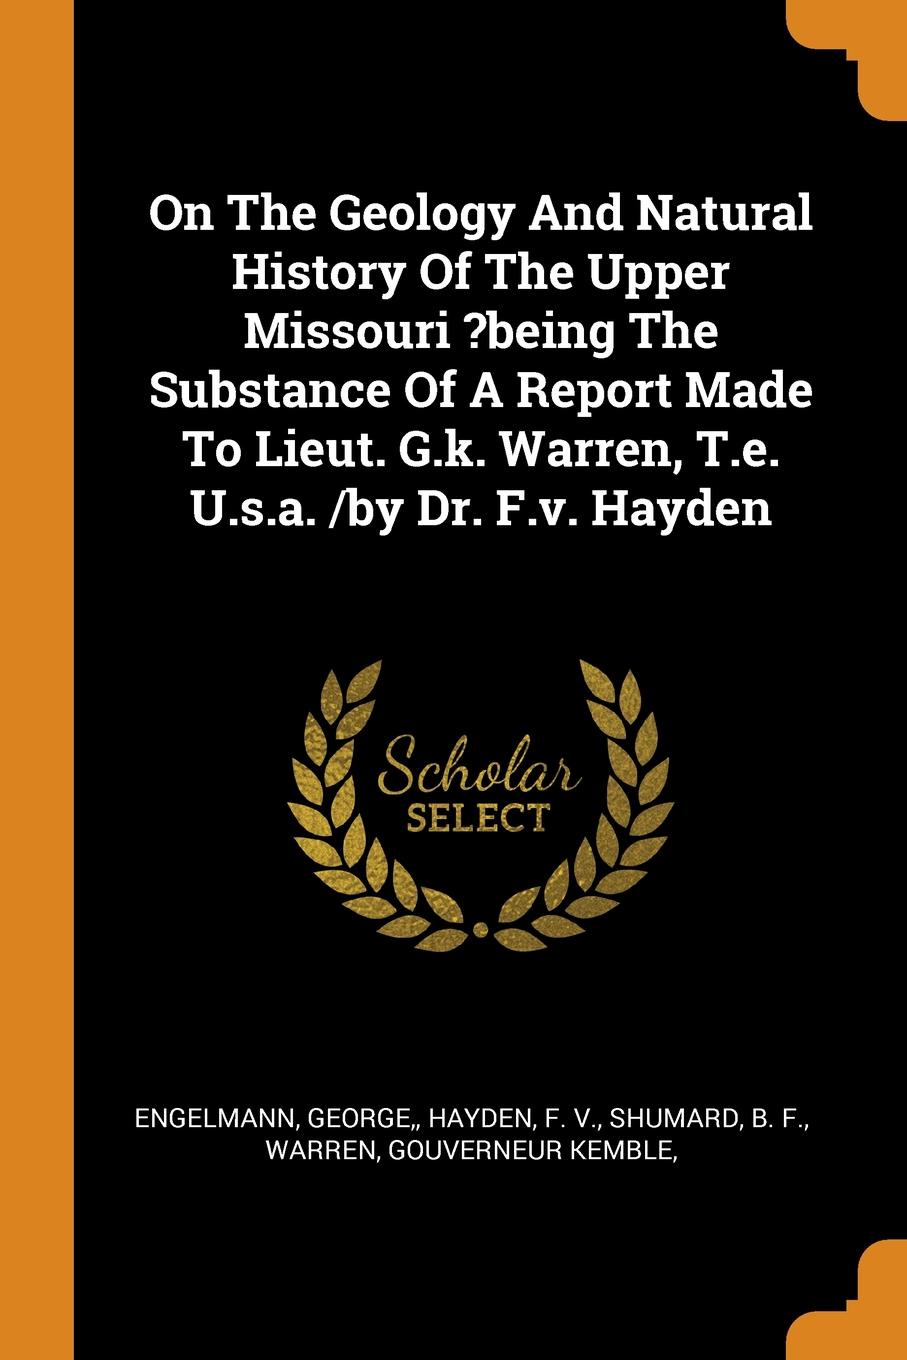 On The Geology And Natural History Of The Upper Missouri .being The Substance Of A Report Made To Lieut. G.k. Warren, T.e. U.s.a. /by Dr. F.v. Hayden